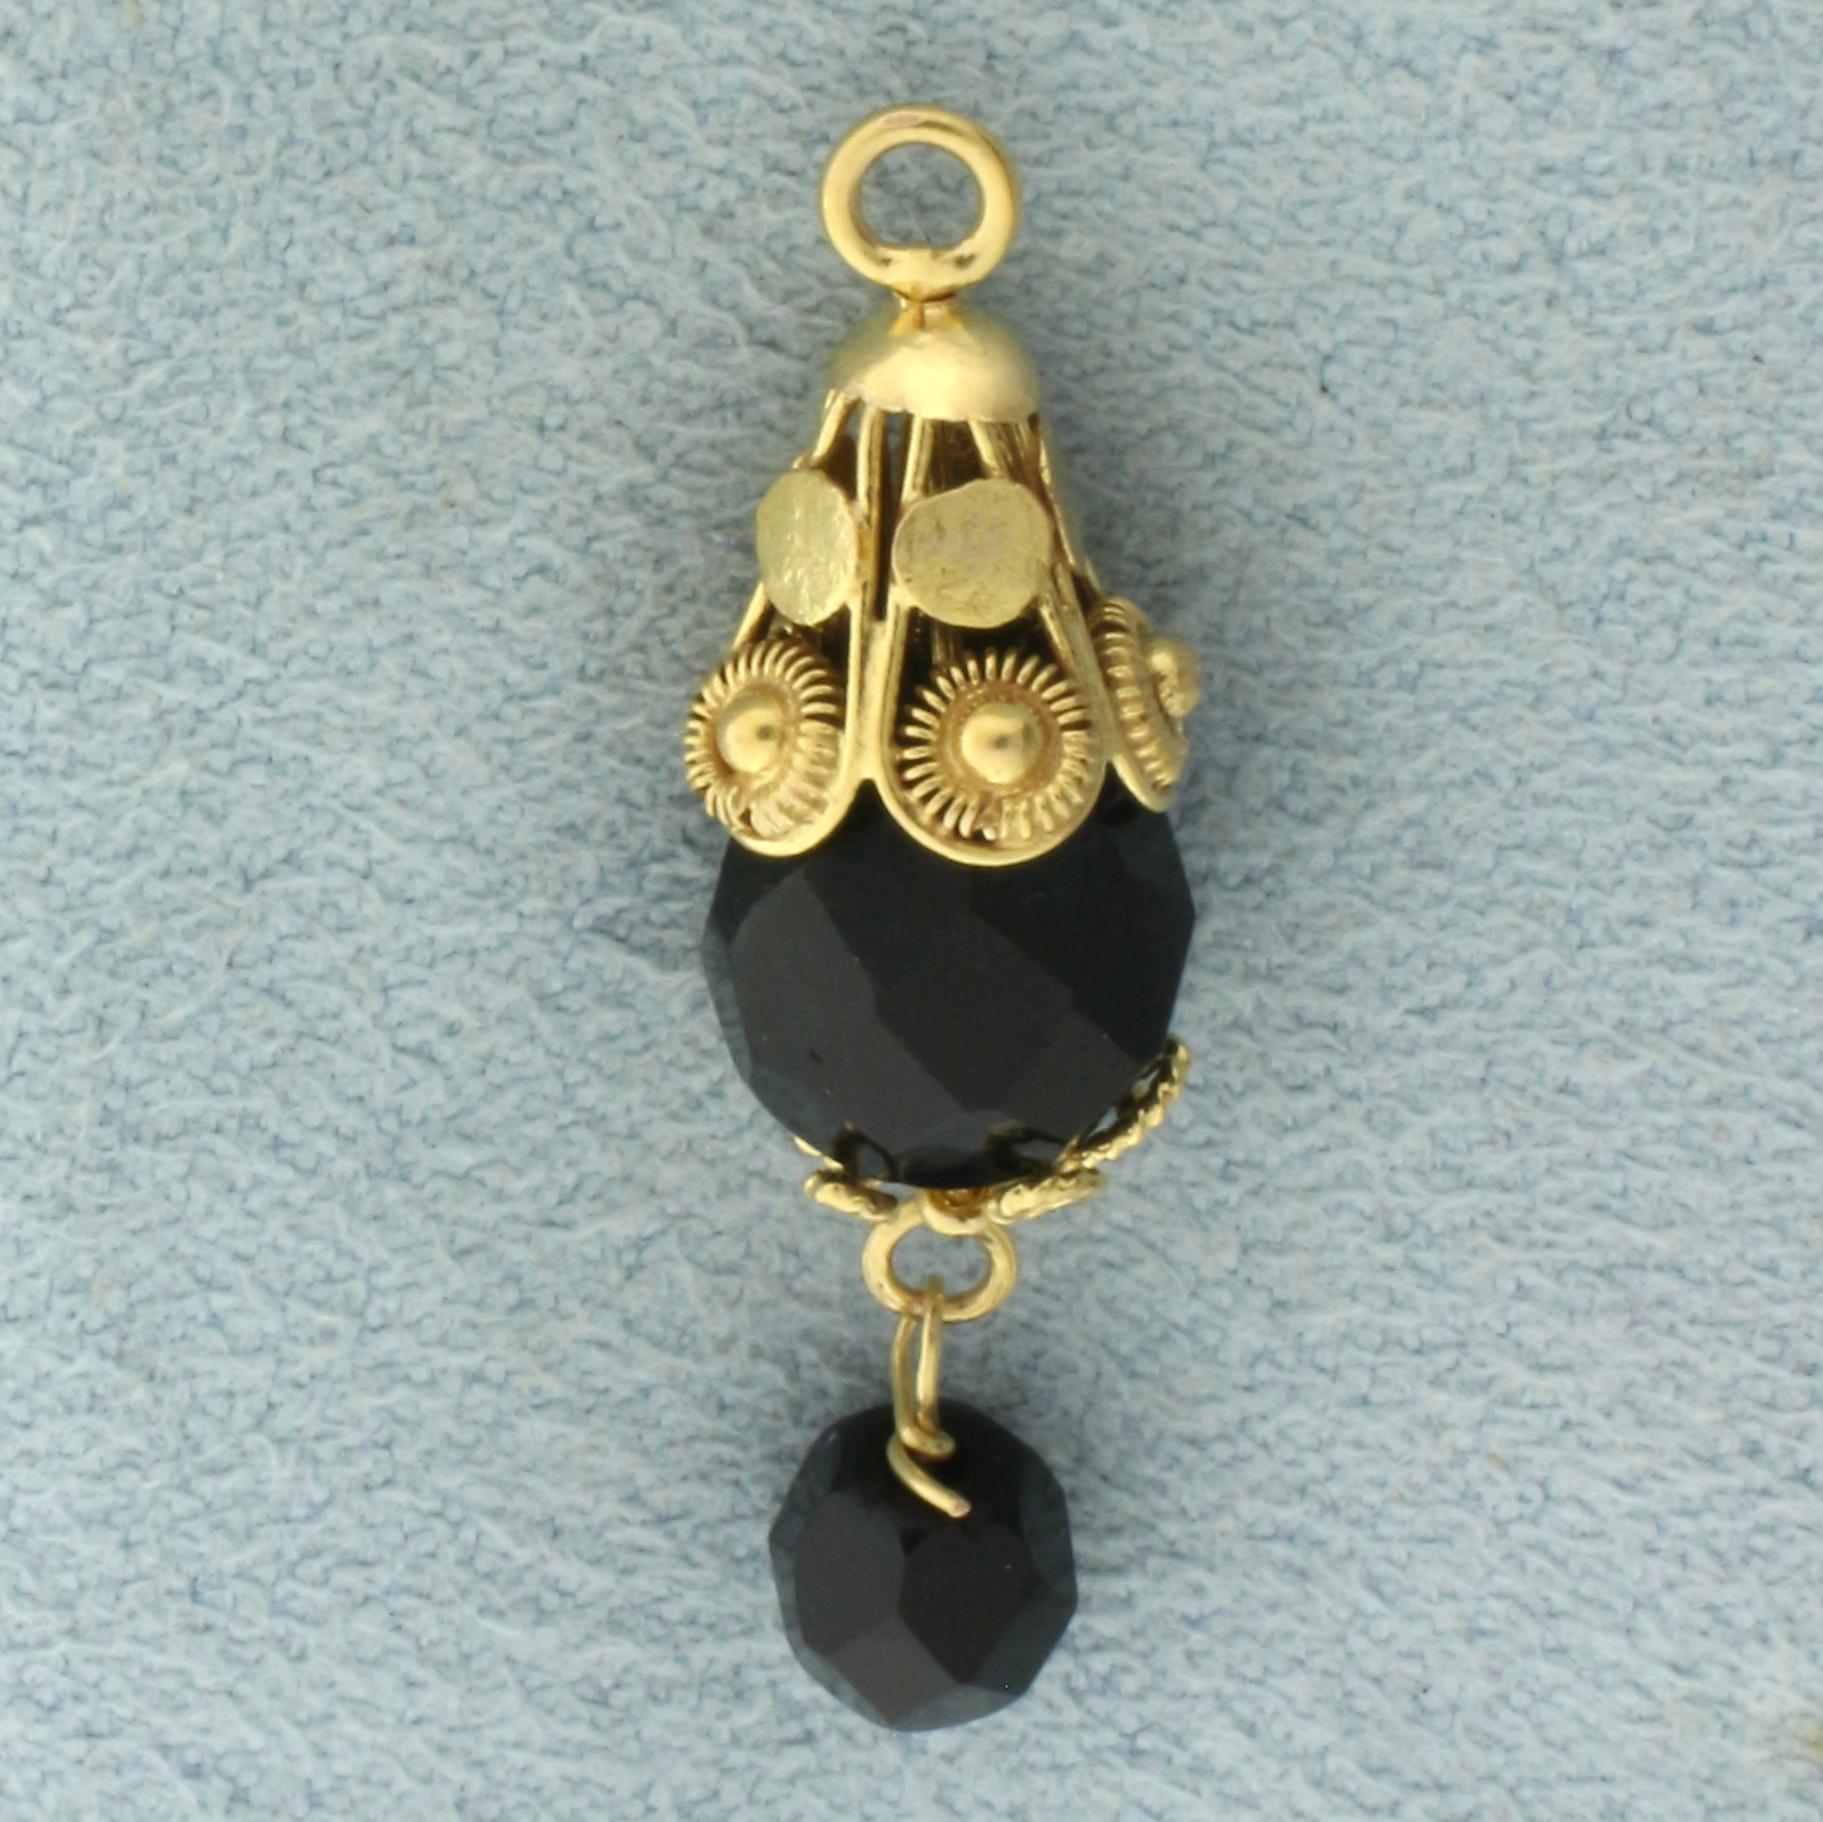 Onyx Bead Dangle Wirework Charm Or Pendant In 14k Yellow Gold